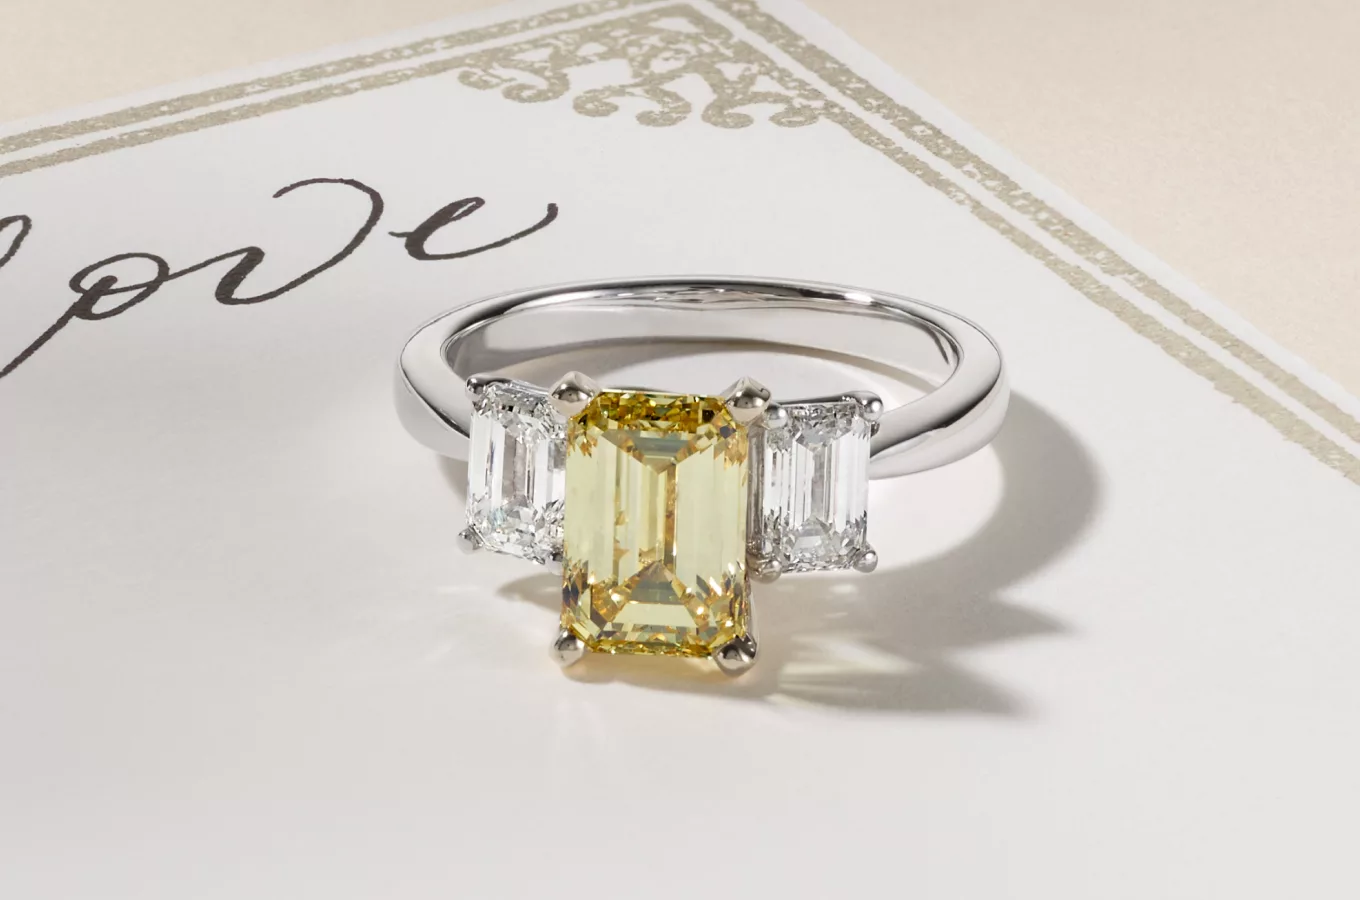 An Emerald cut Fancy Yellow Lab-grown diamond set in a three stone engagement ring with diamonds in a white gold ring